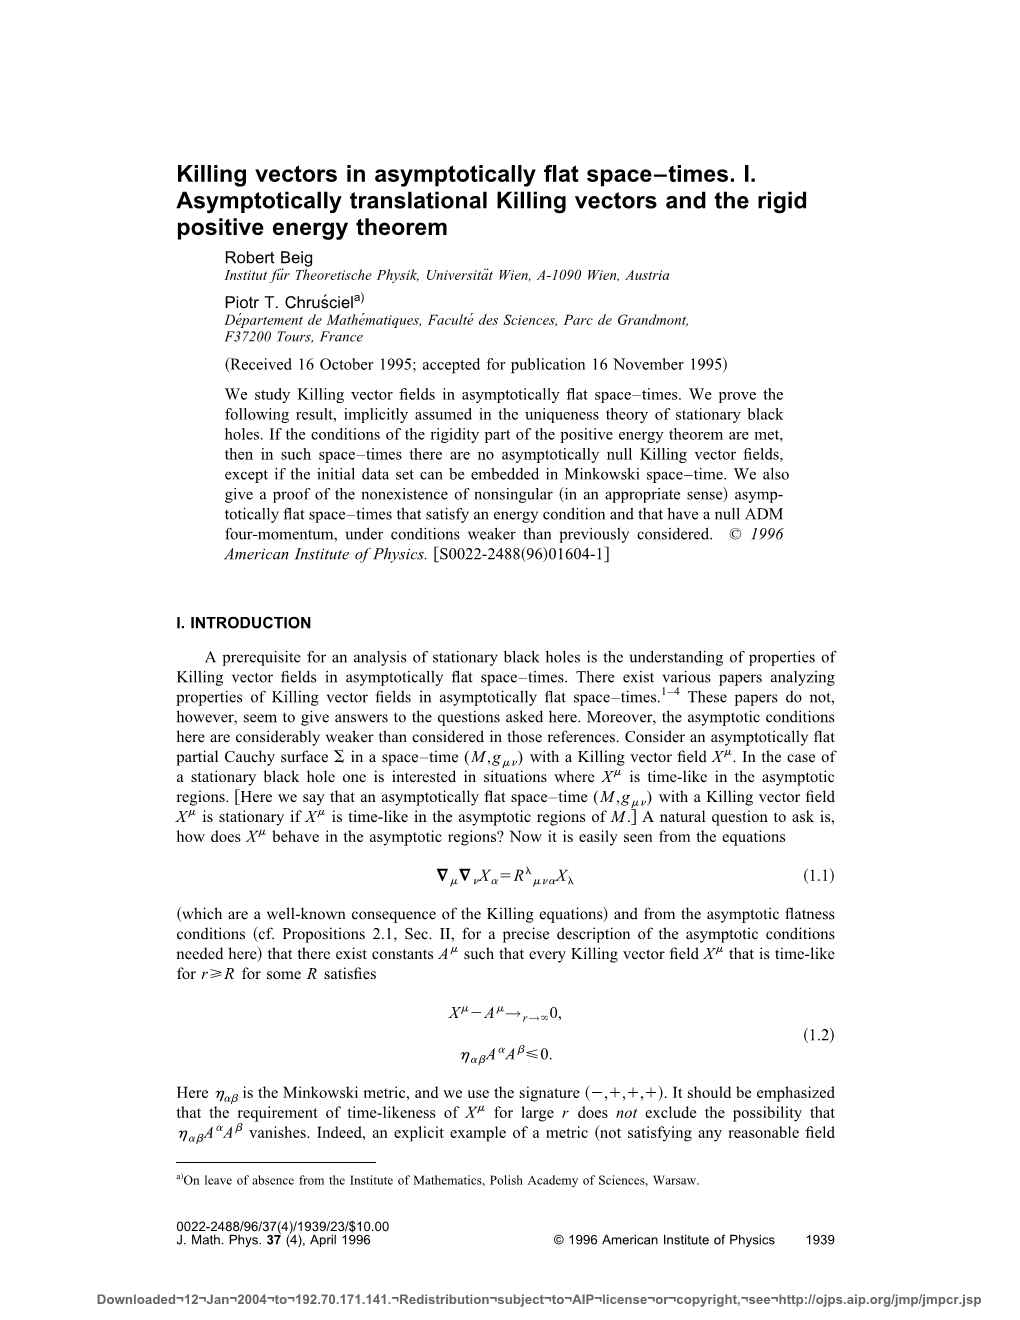 Killing Vectors in Asymptotically Flat Space–Times. I. Asymptotically Translational Killing Vectors and the Rigid Positive